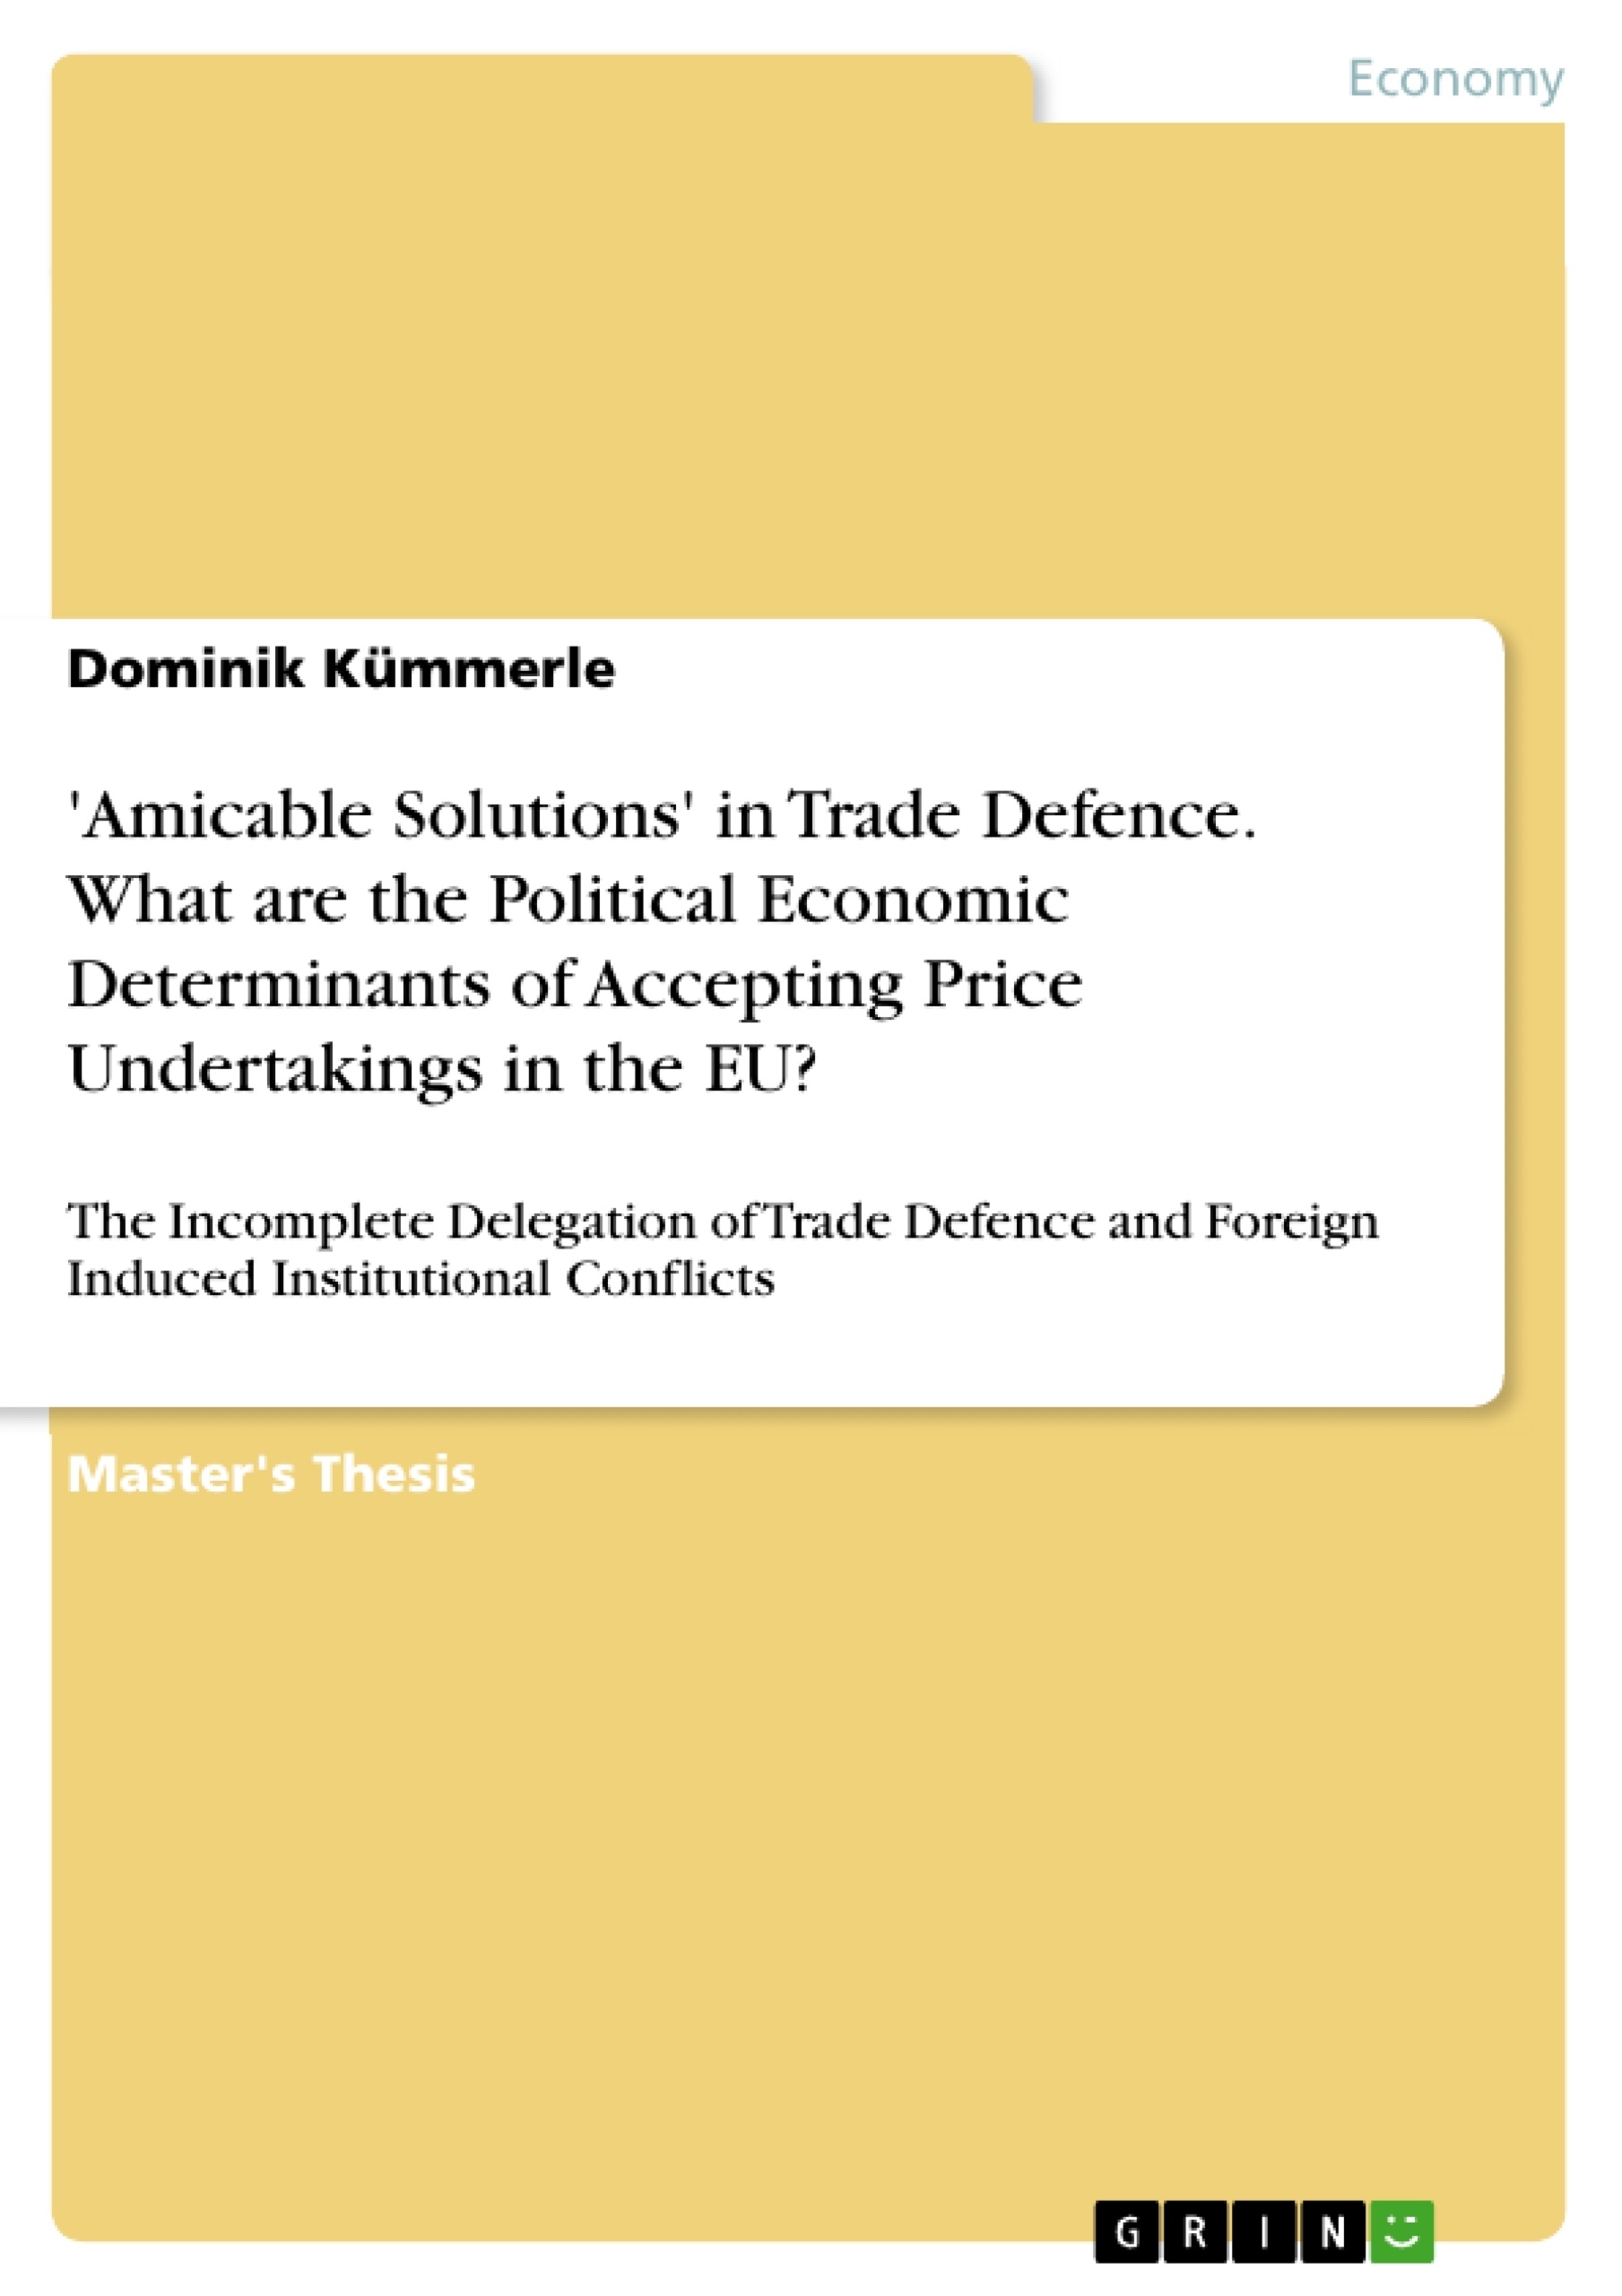 Title: 'Amicable Solutions' in Trade Defence. What are the Political Economic Determinants of Accepting Price Undertakings in the EU?